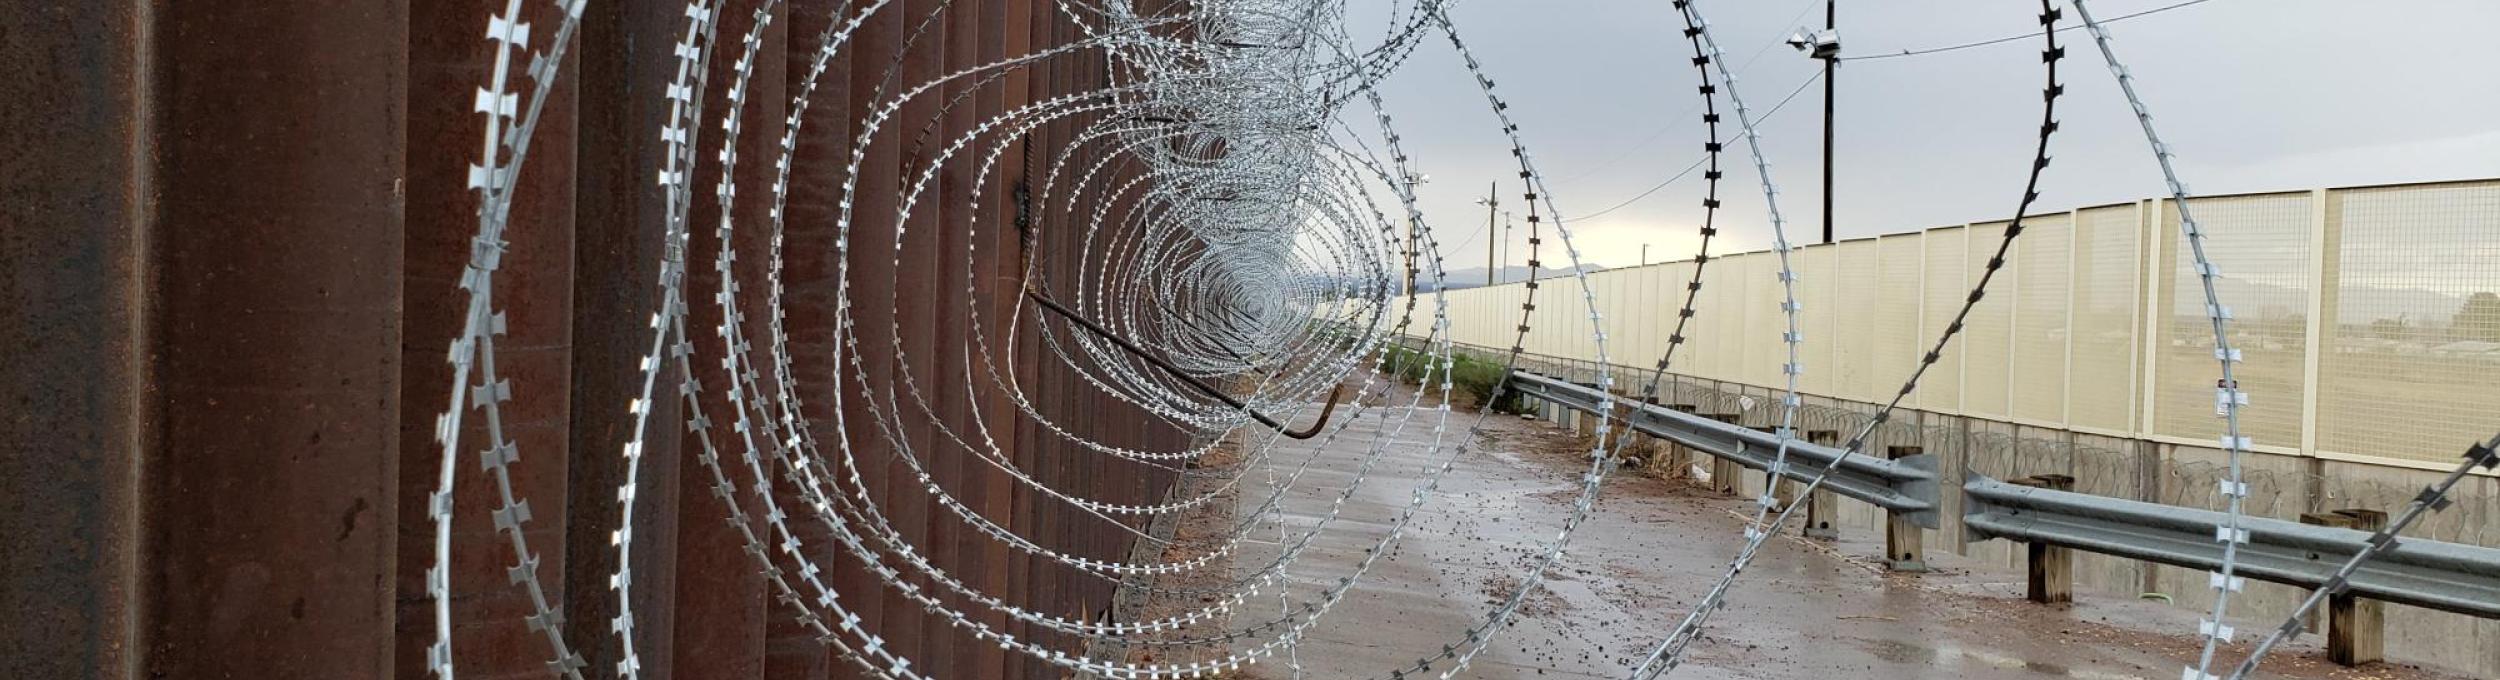 Looking through a coil of barbed wire at a border wall